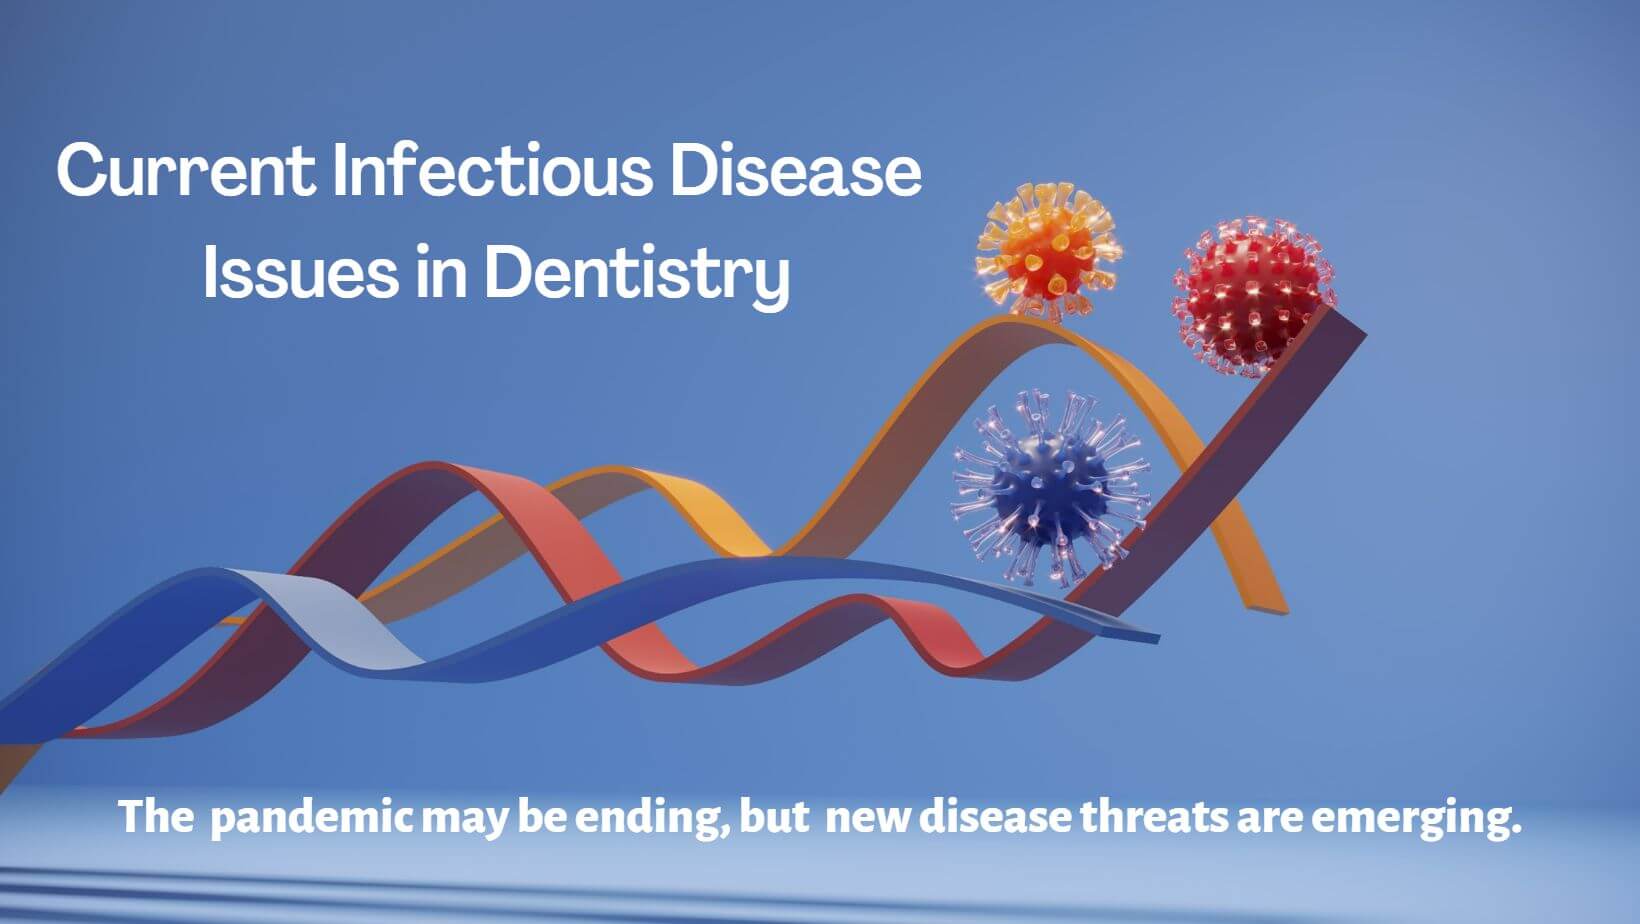 Mary Govoni, MBA, RDH, CDA, on Current Infectious Disease Issues in Dentistry and Why We Need to Stay Alert